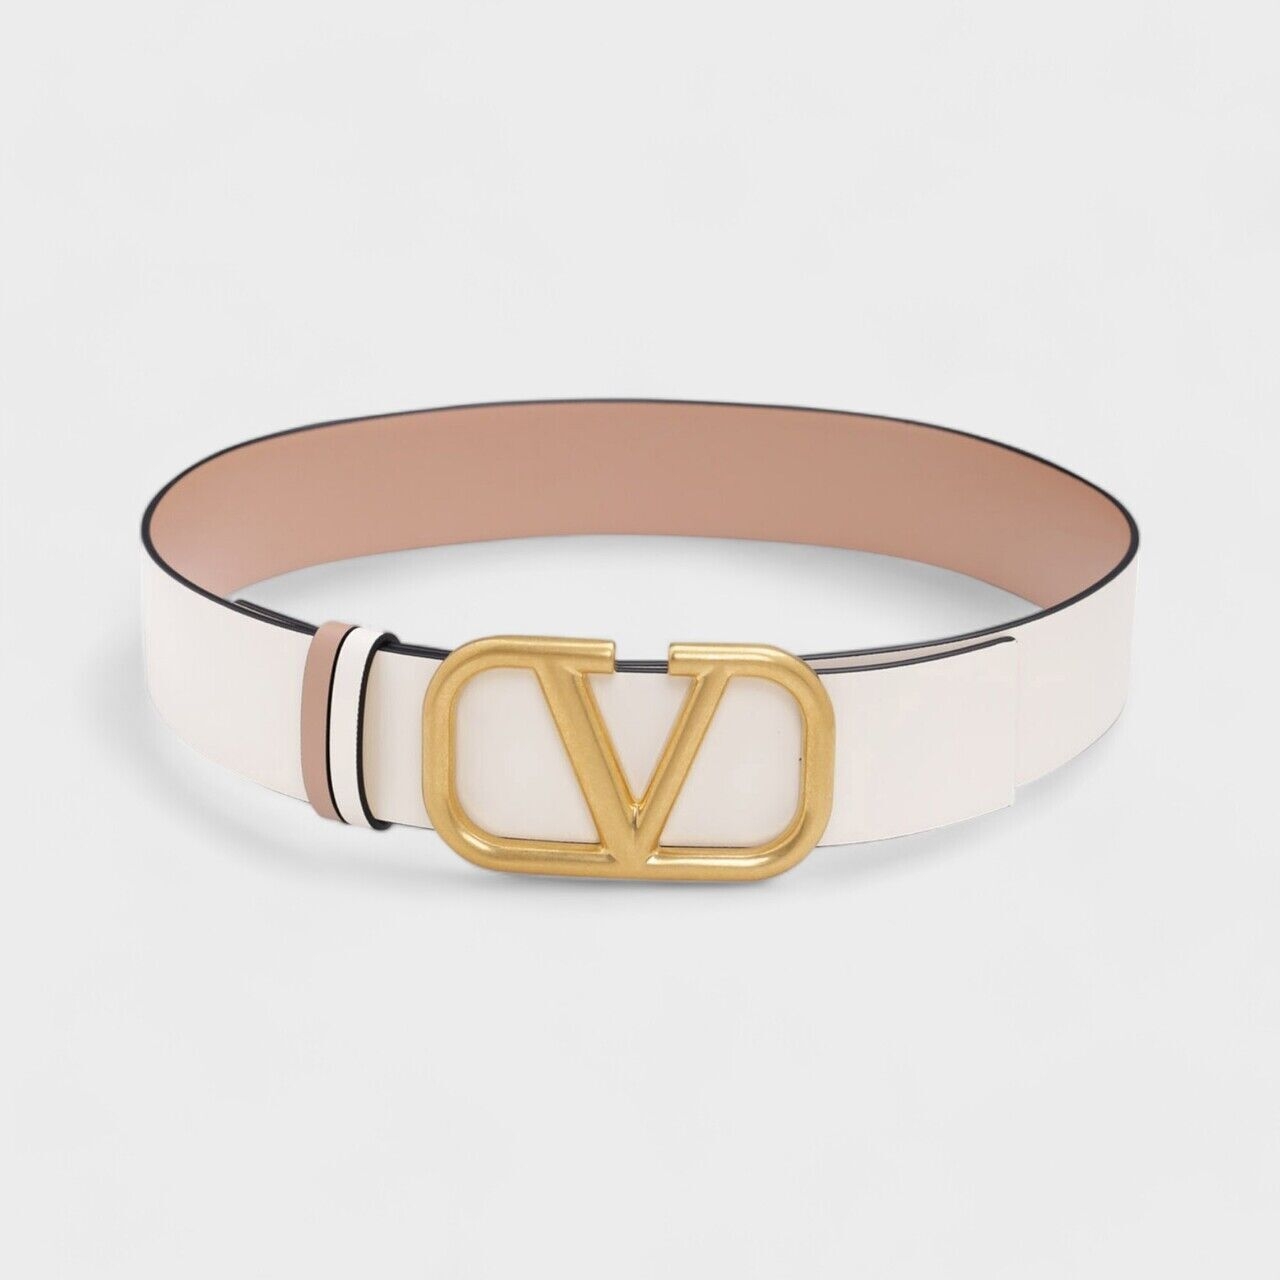 Valentino Reversible in Light Ivory/Rose Cannelle Leather with VLogo Buckle Belt